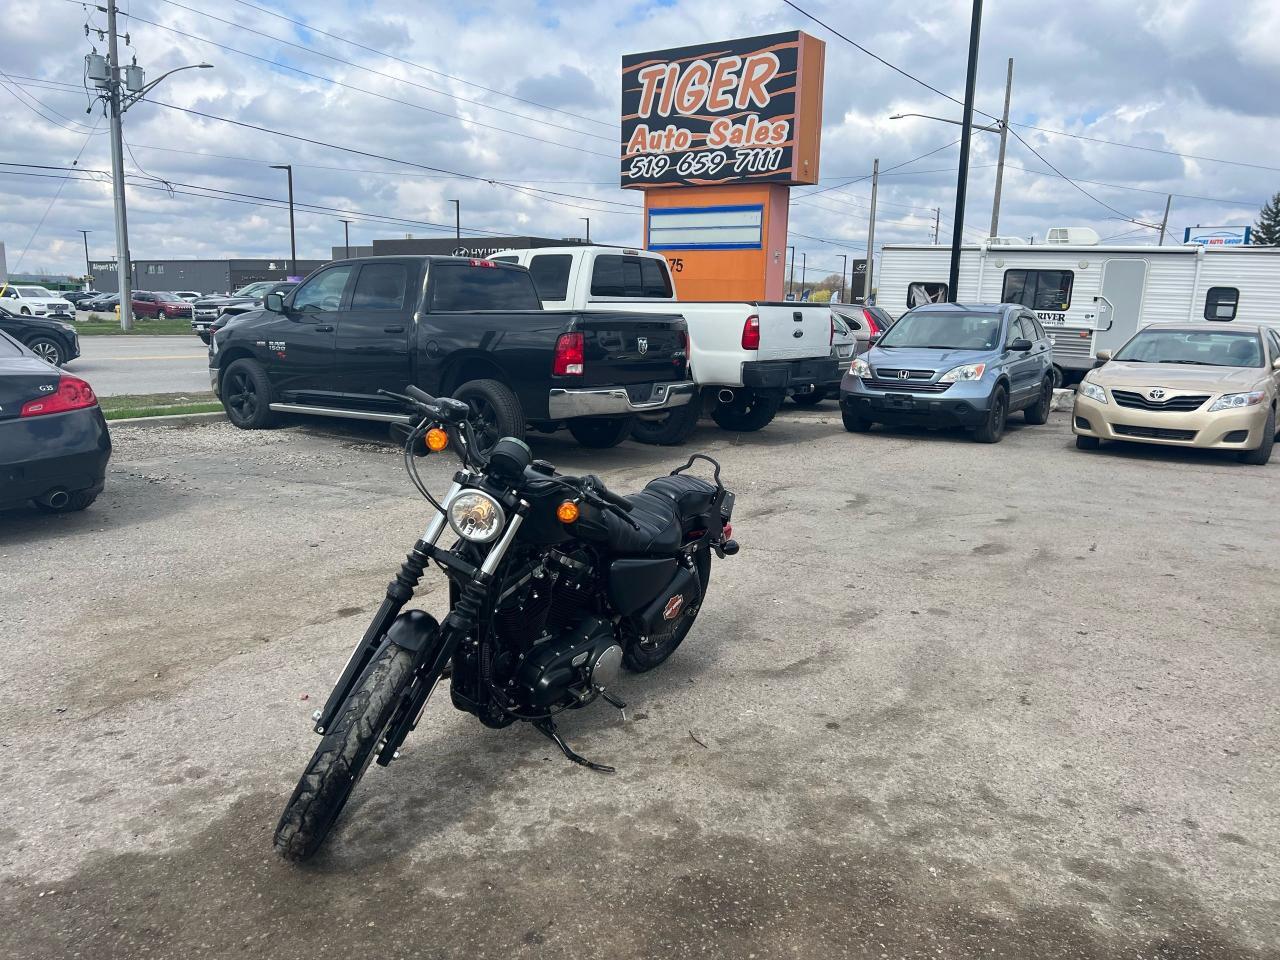 2018 Harley-Davidson XL883 IRON*SPORTSTER*ONLY 10,000KMS*GREAT SHAPE*